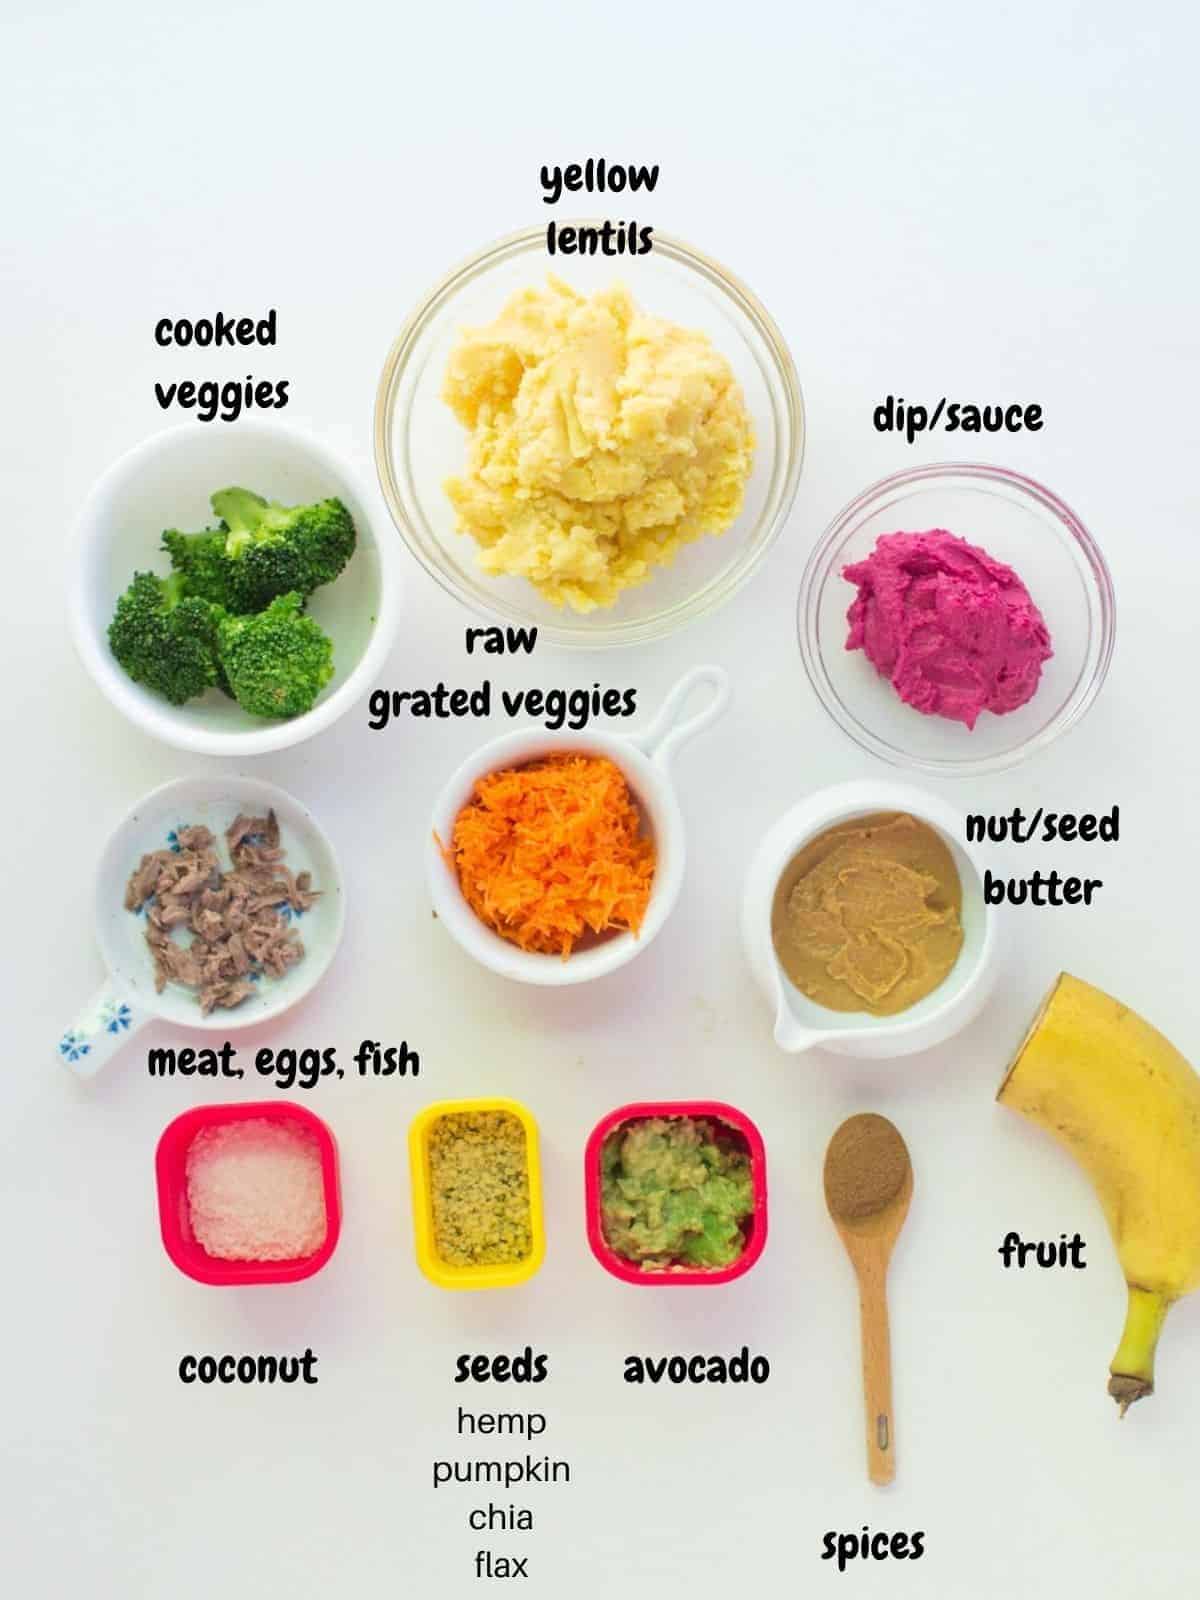 Various mix-in ingredients for lentils laid out on a white background